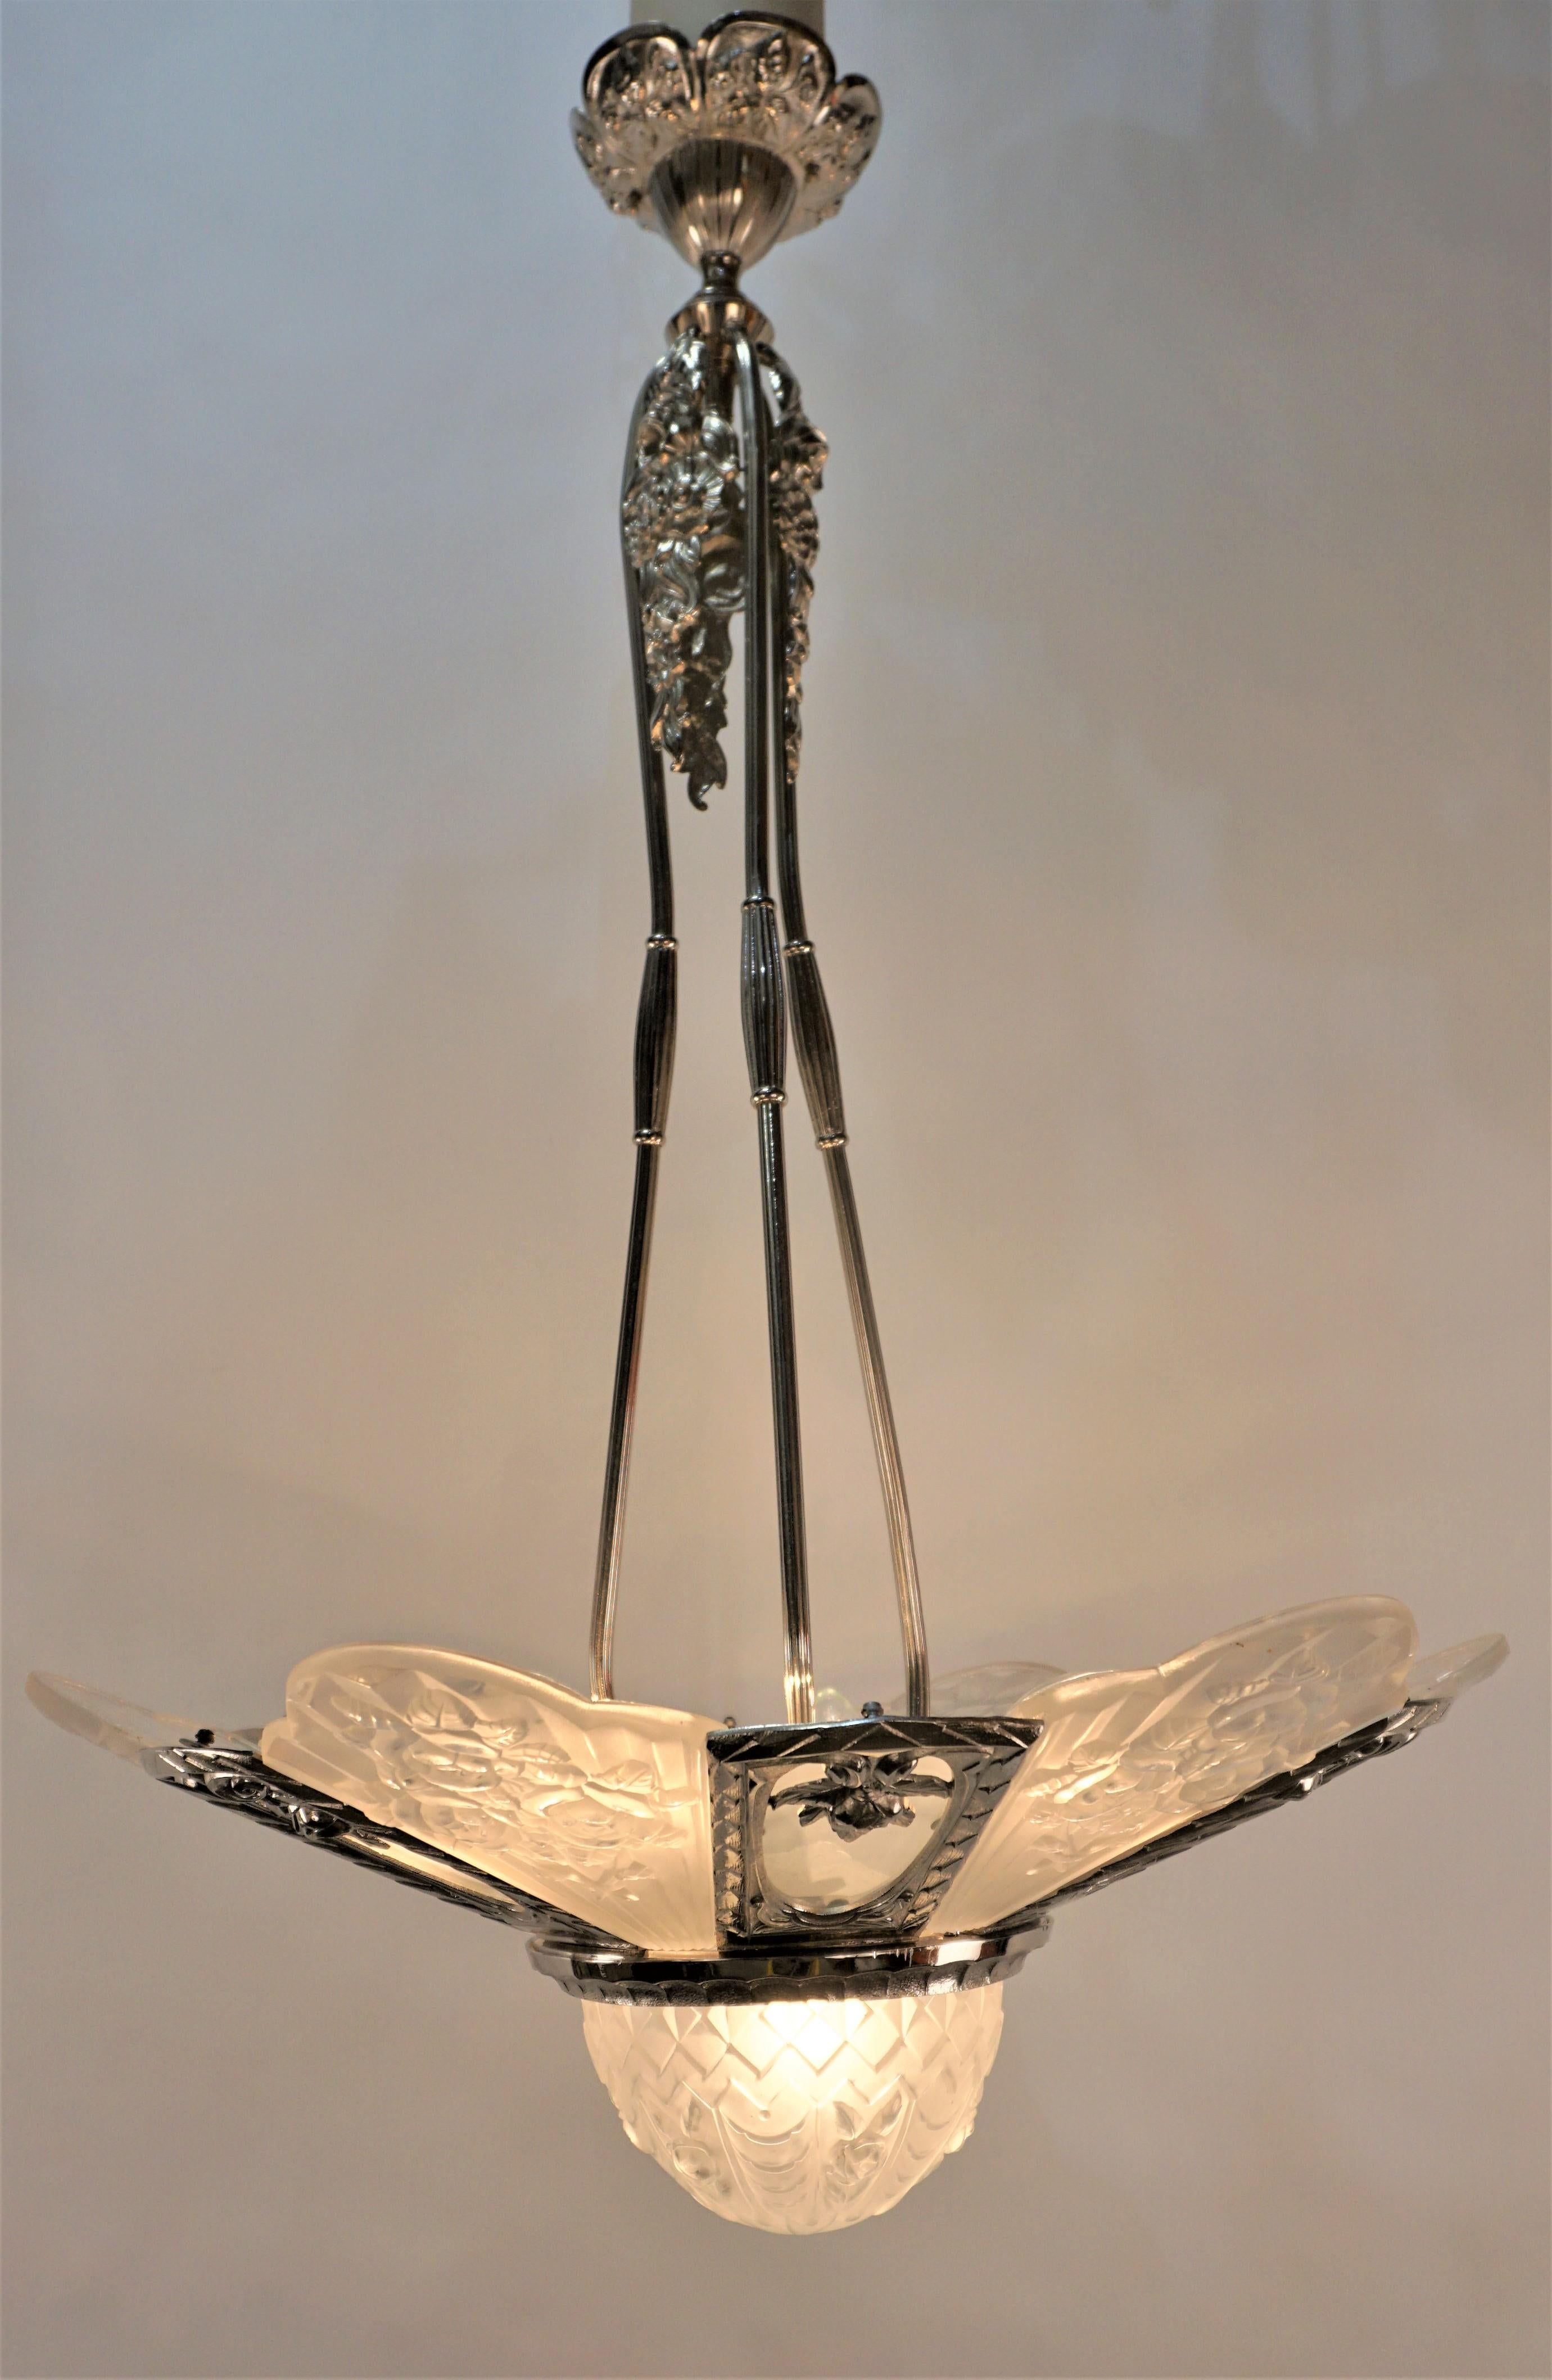 French 1920's Art Deco chandelier by Gilles For Sale 2